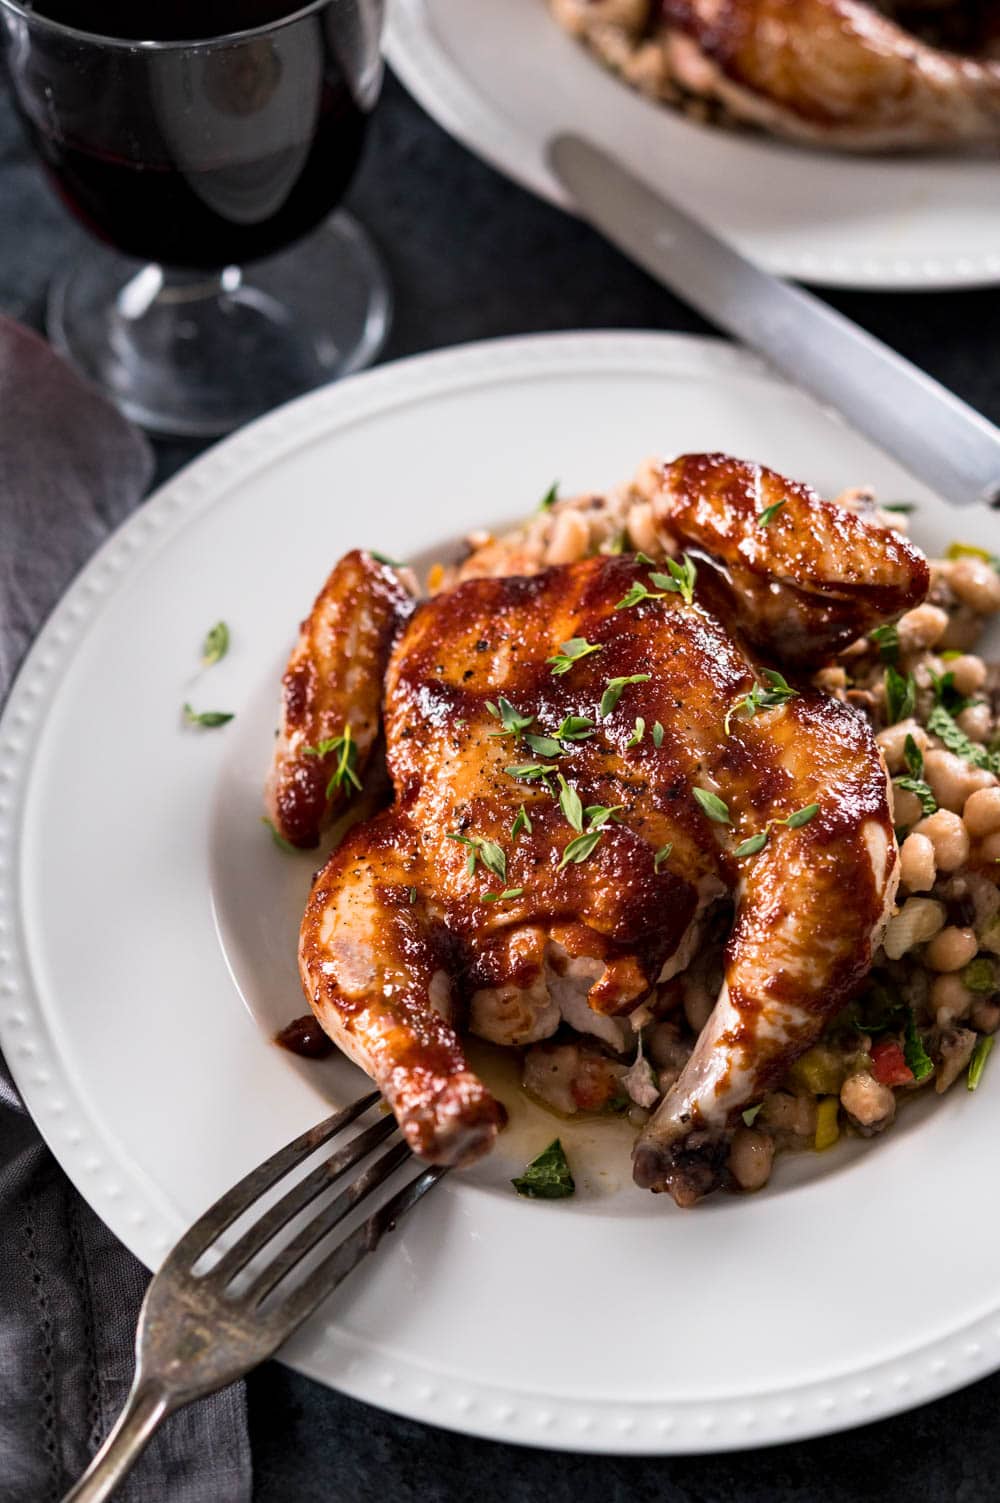 A plate with beans and a whole roasted young chicken.